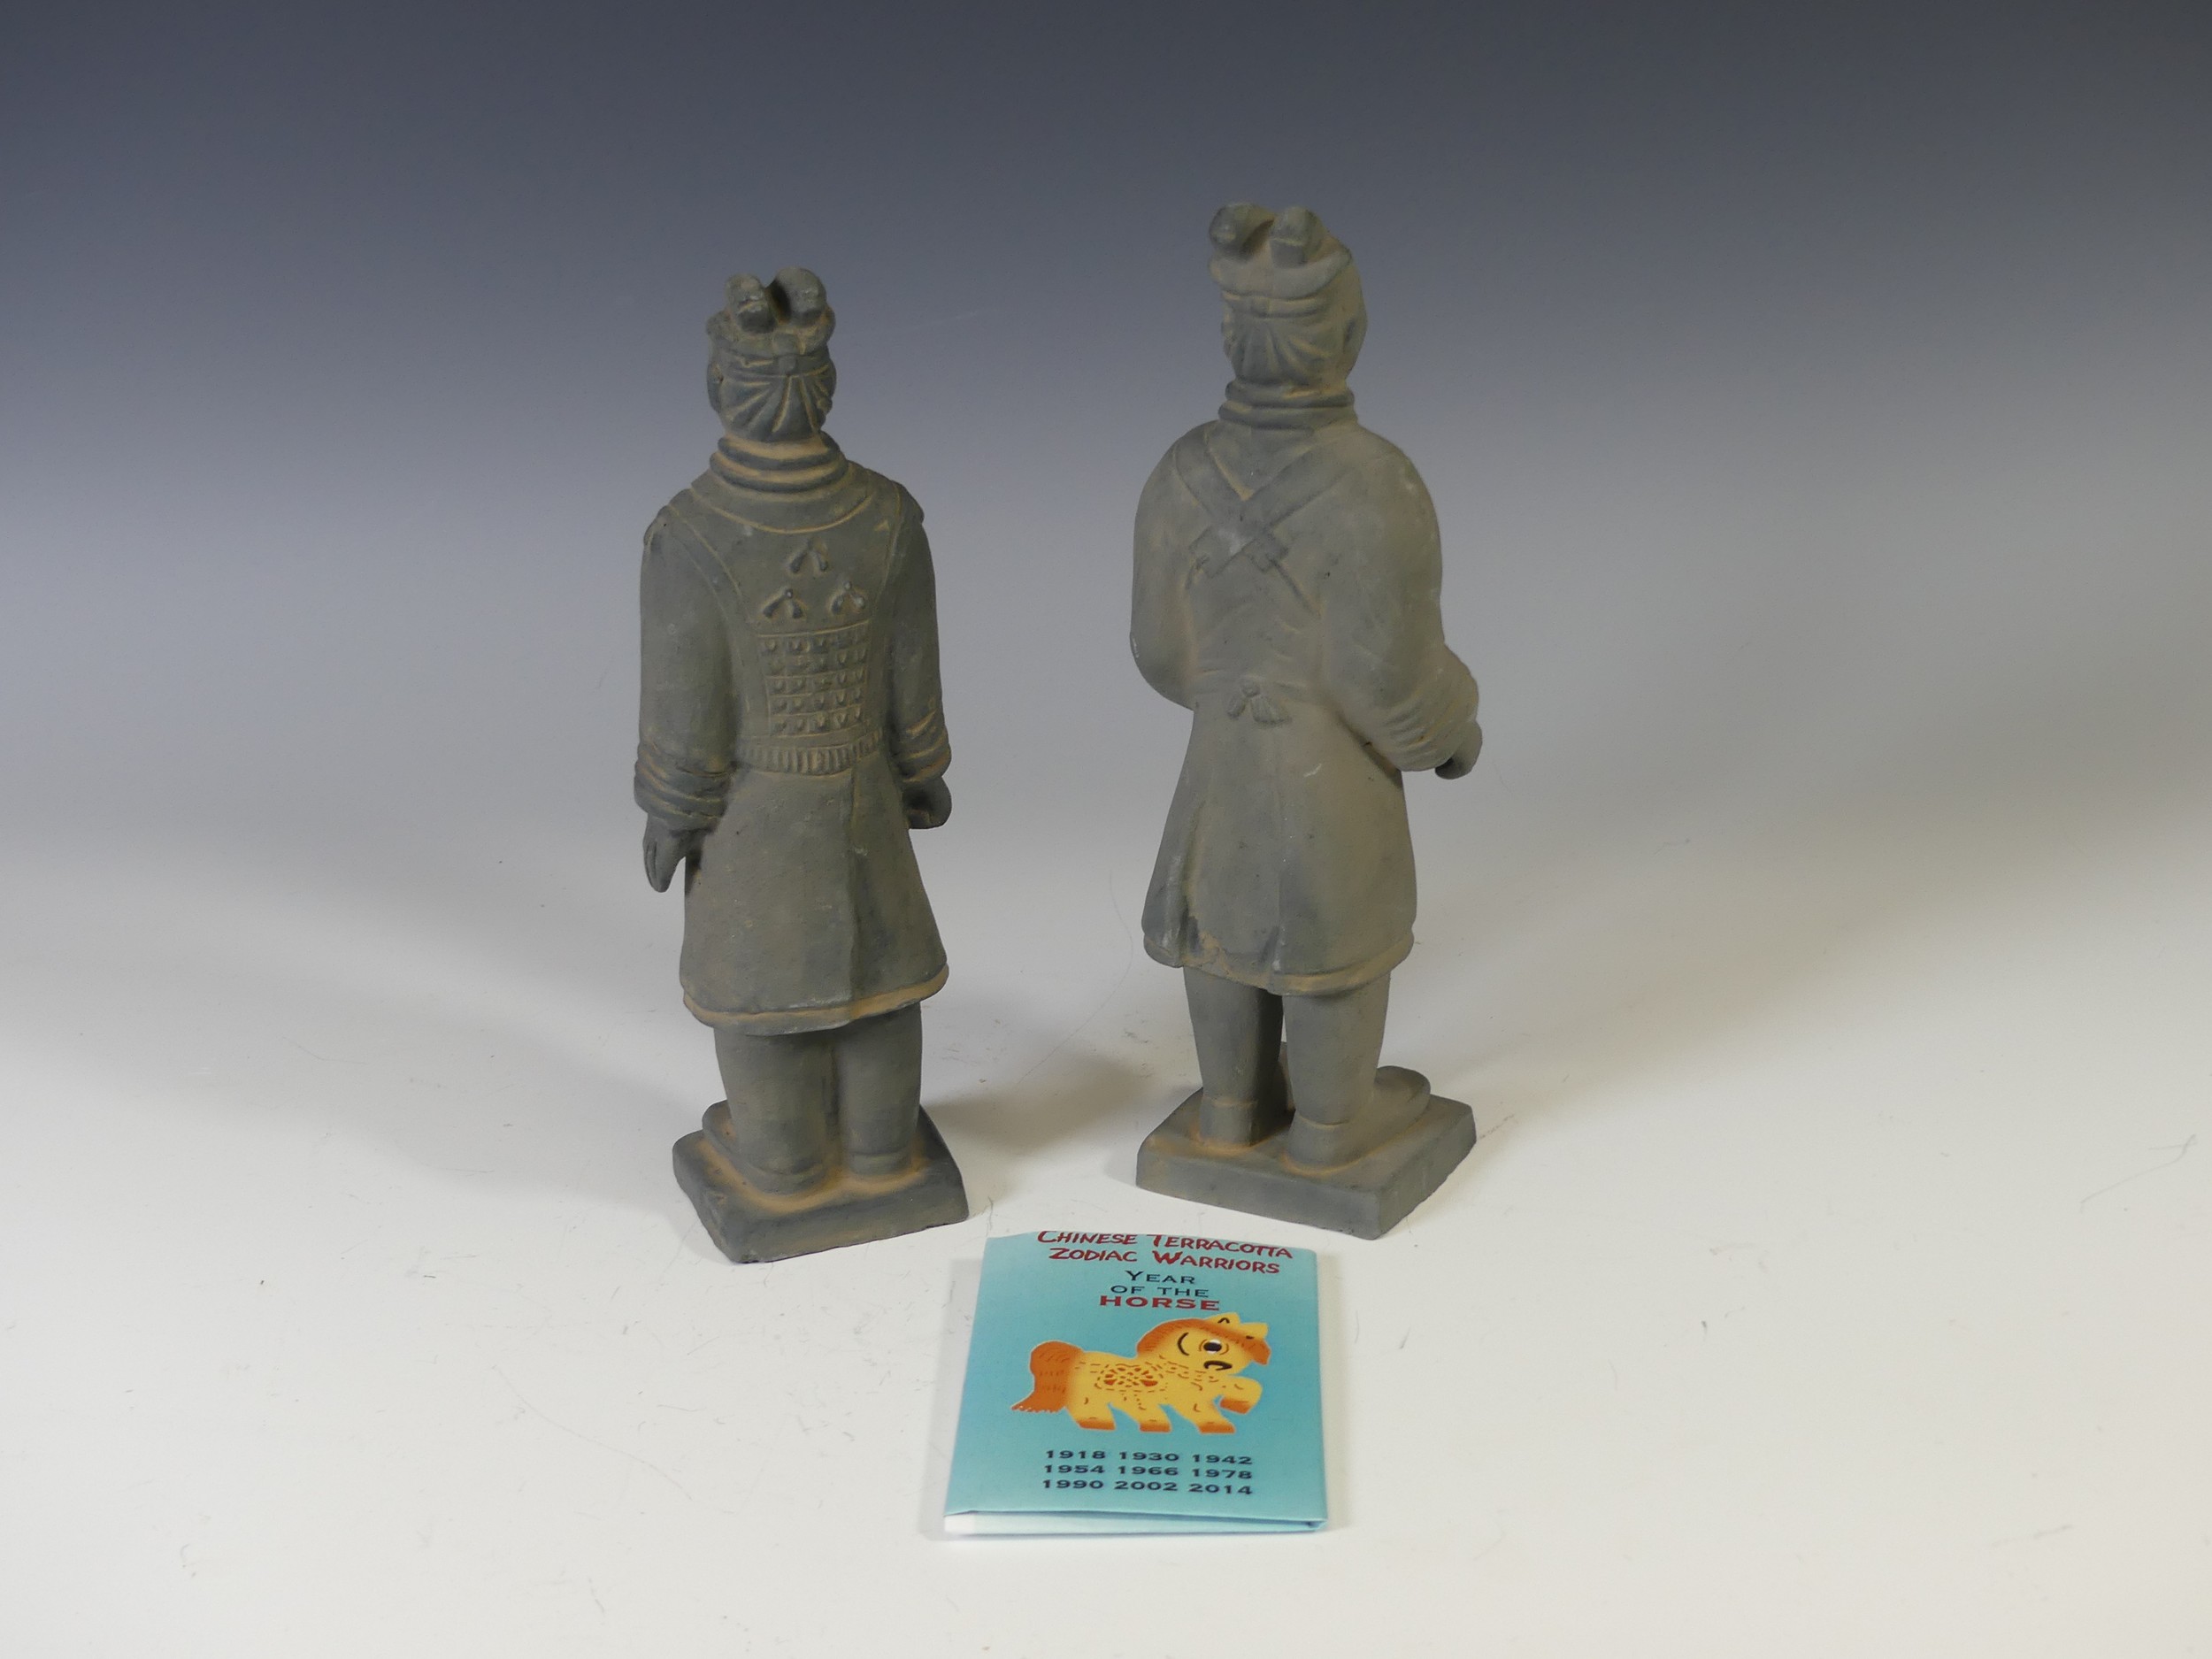 A pair of reproduction Terracotta Army figures, H 22cm, cased, with certificates (2) - Image 2 of 2